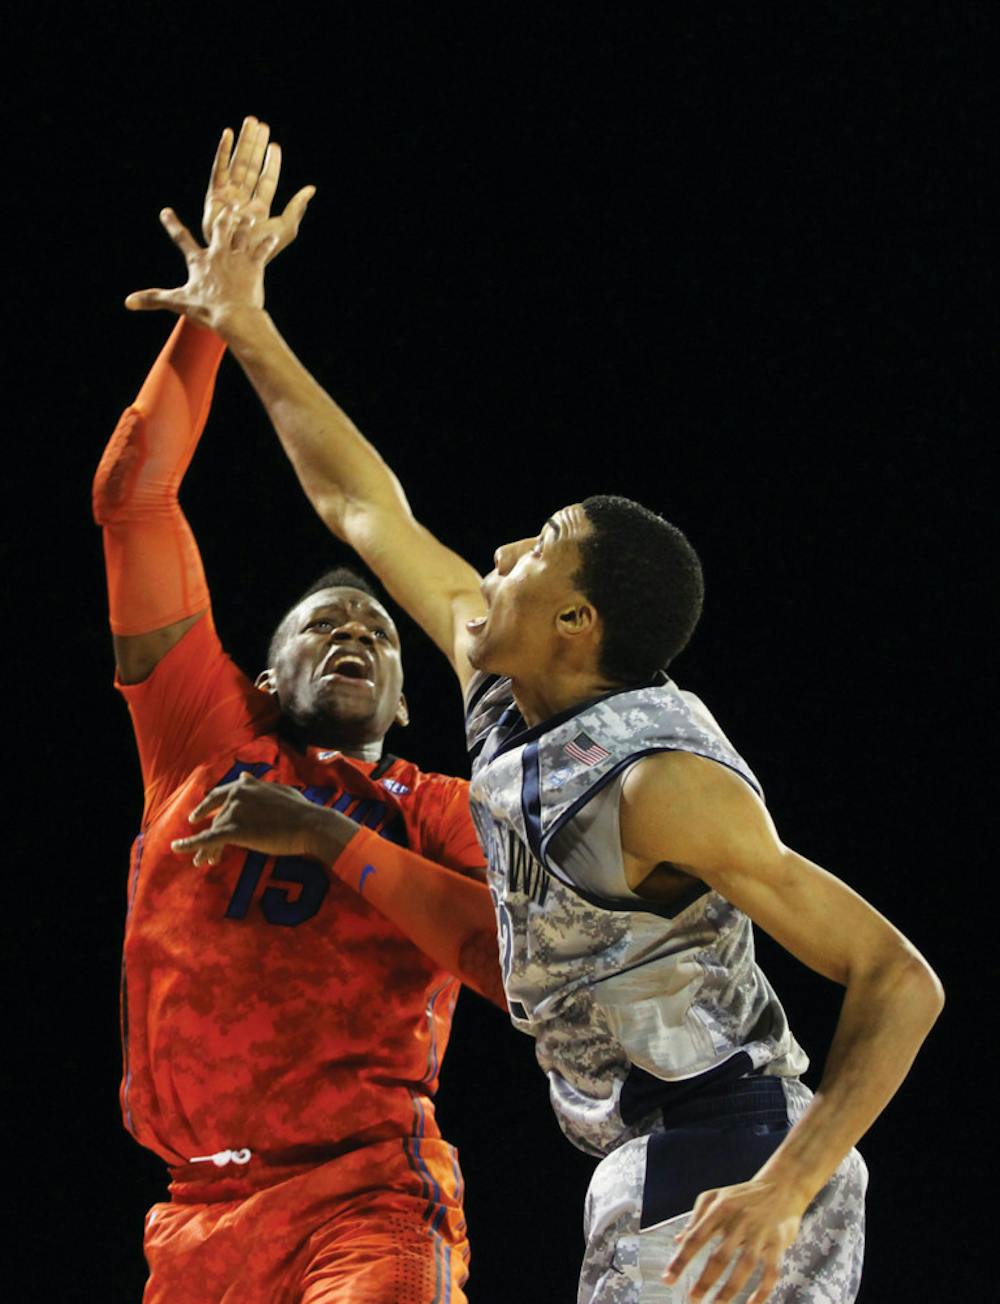 <p>Florida forward Will Yeguete (15) attempts a shot against Georgetown forward Otto Porter on Nov. 9 aboard the USS Bataan in Jacksonville.</p>
<div><span><br /></span></div>